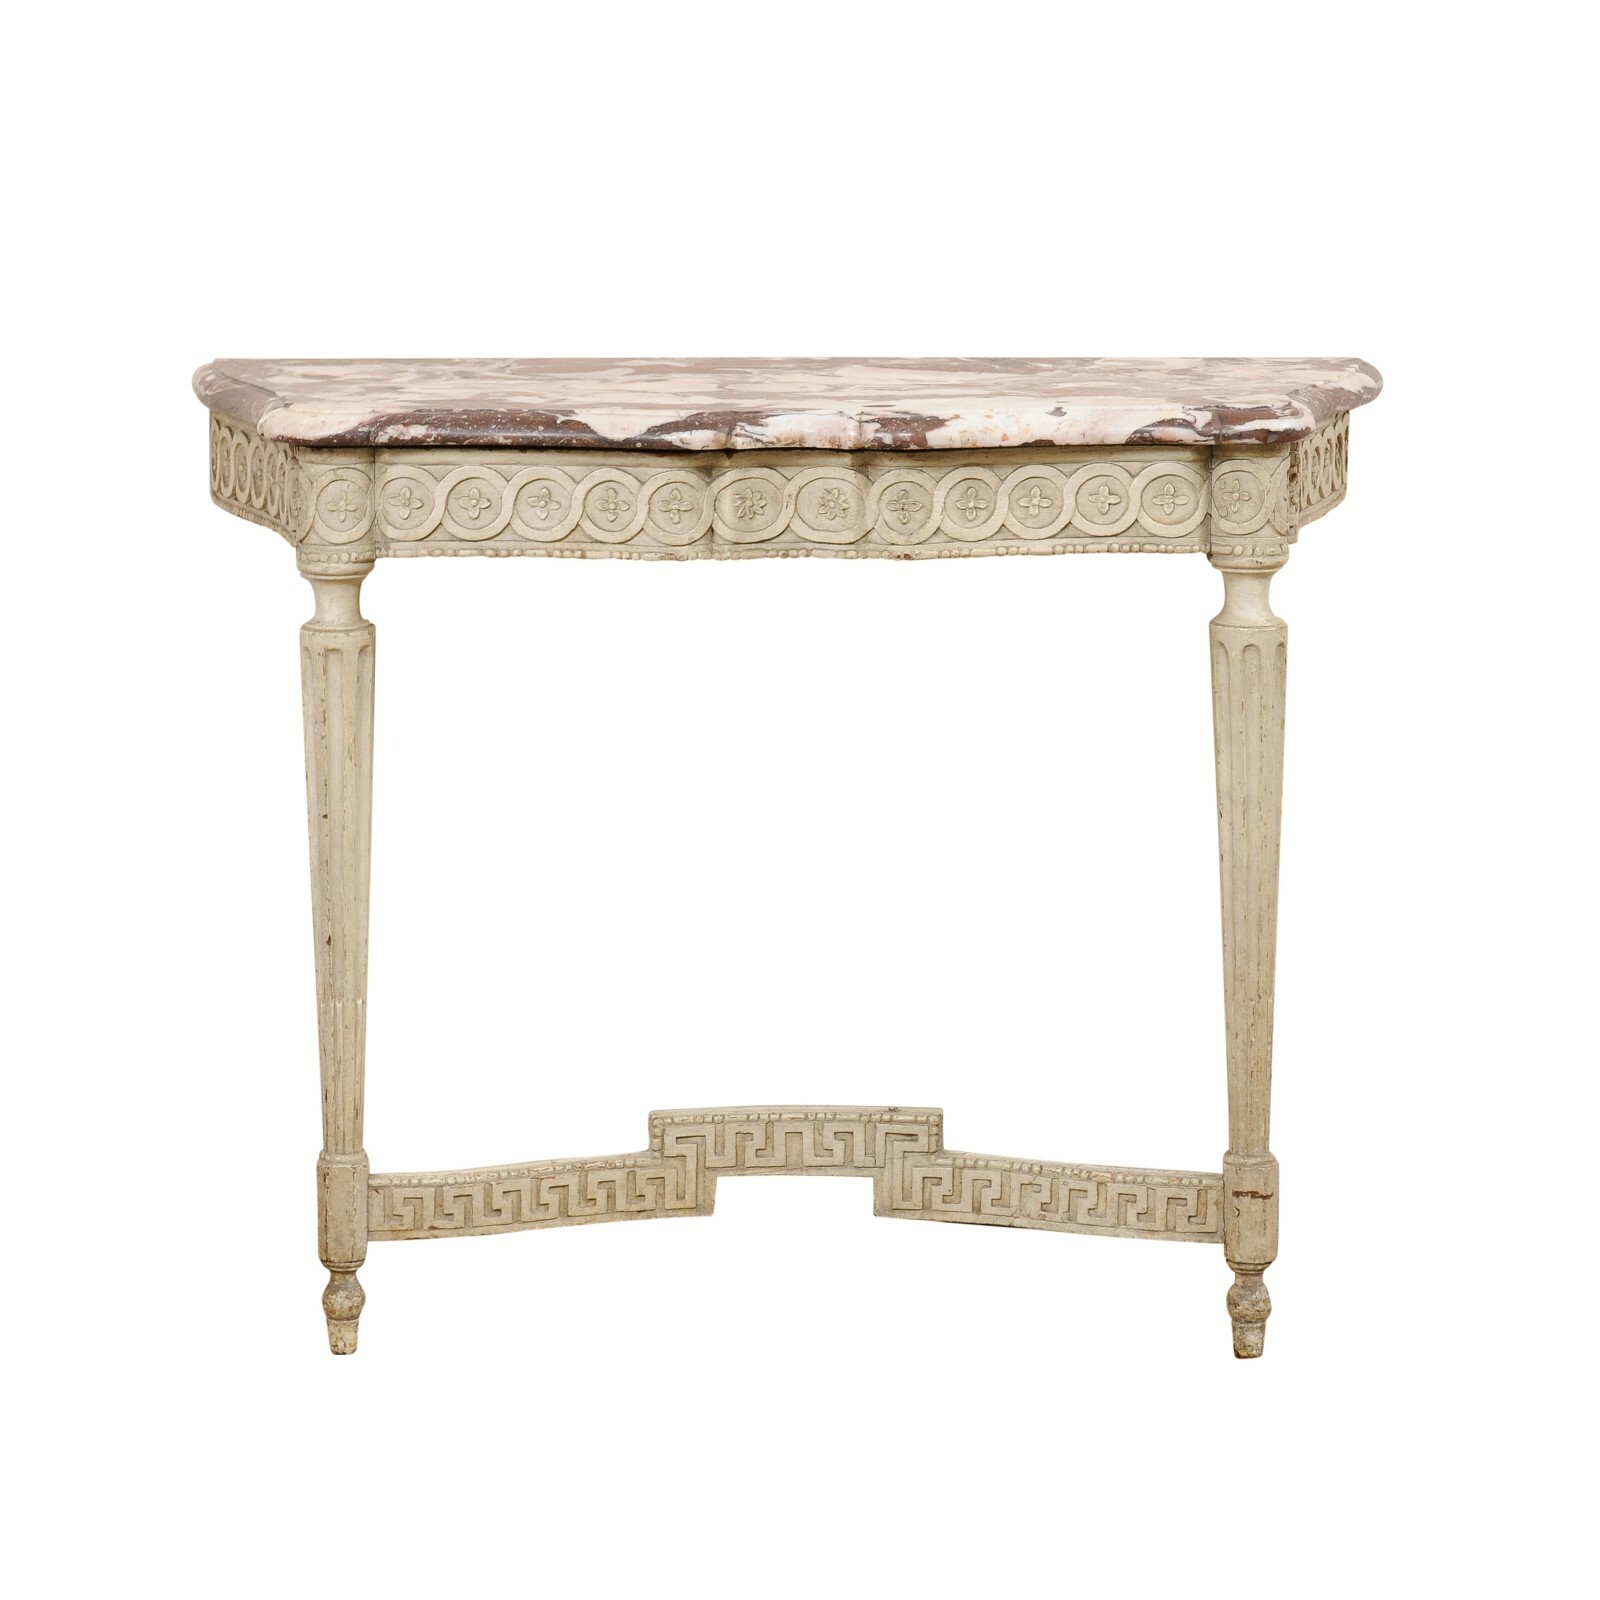 Elegant French Marble Top Console, 18th C.